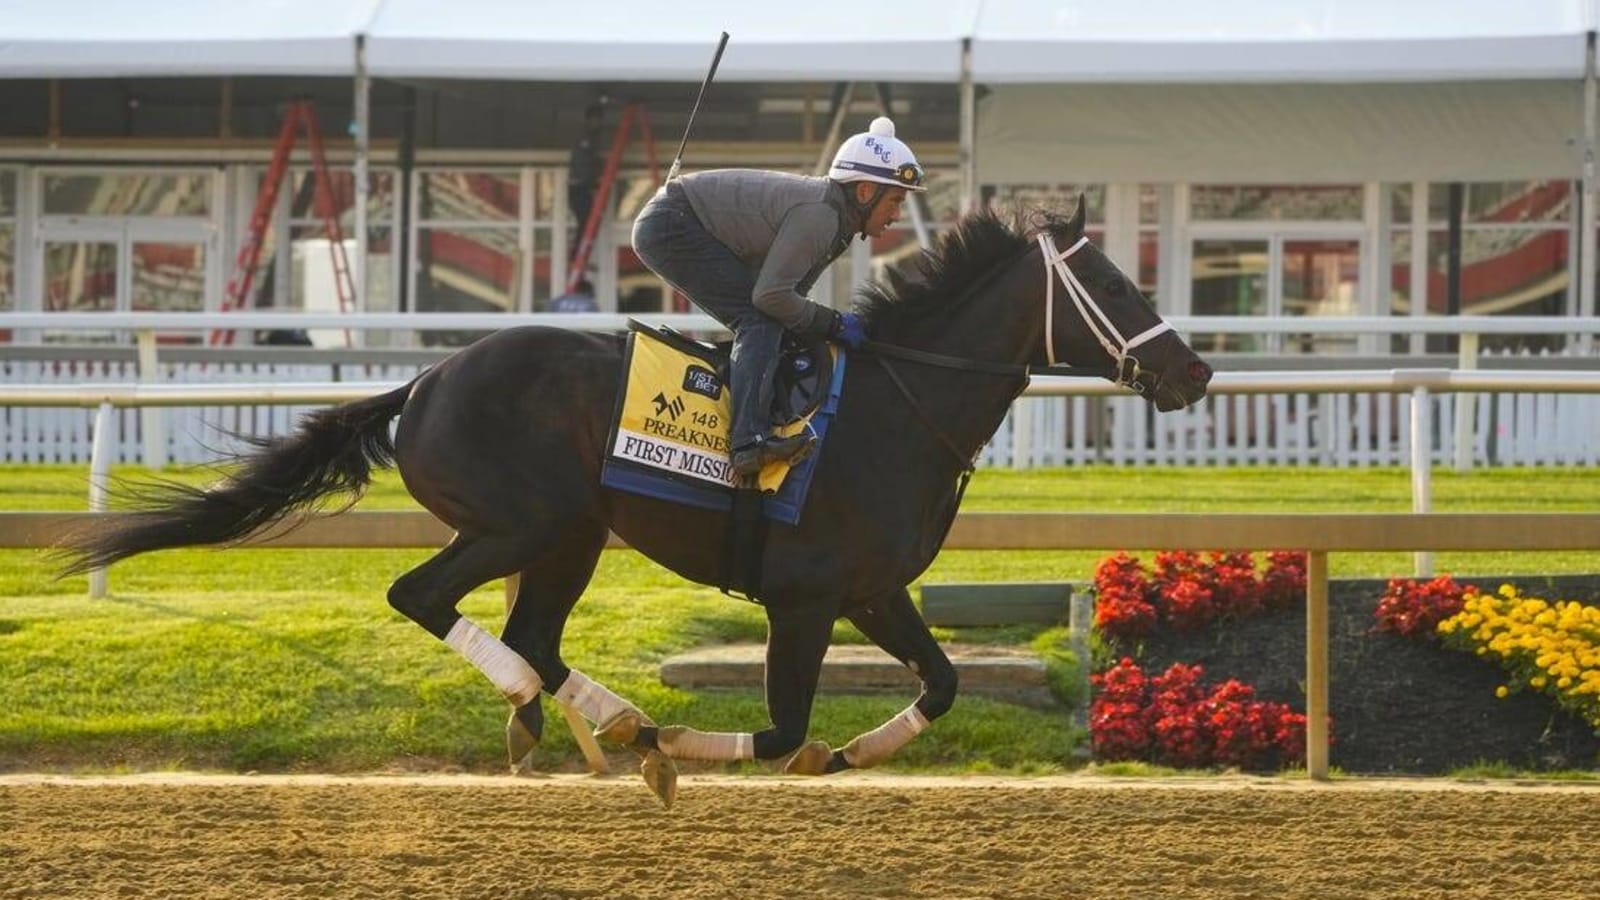 First Mission scratched from Preakness Stakes